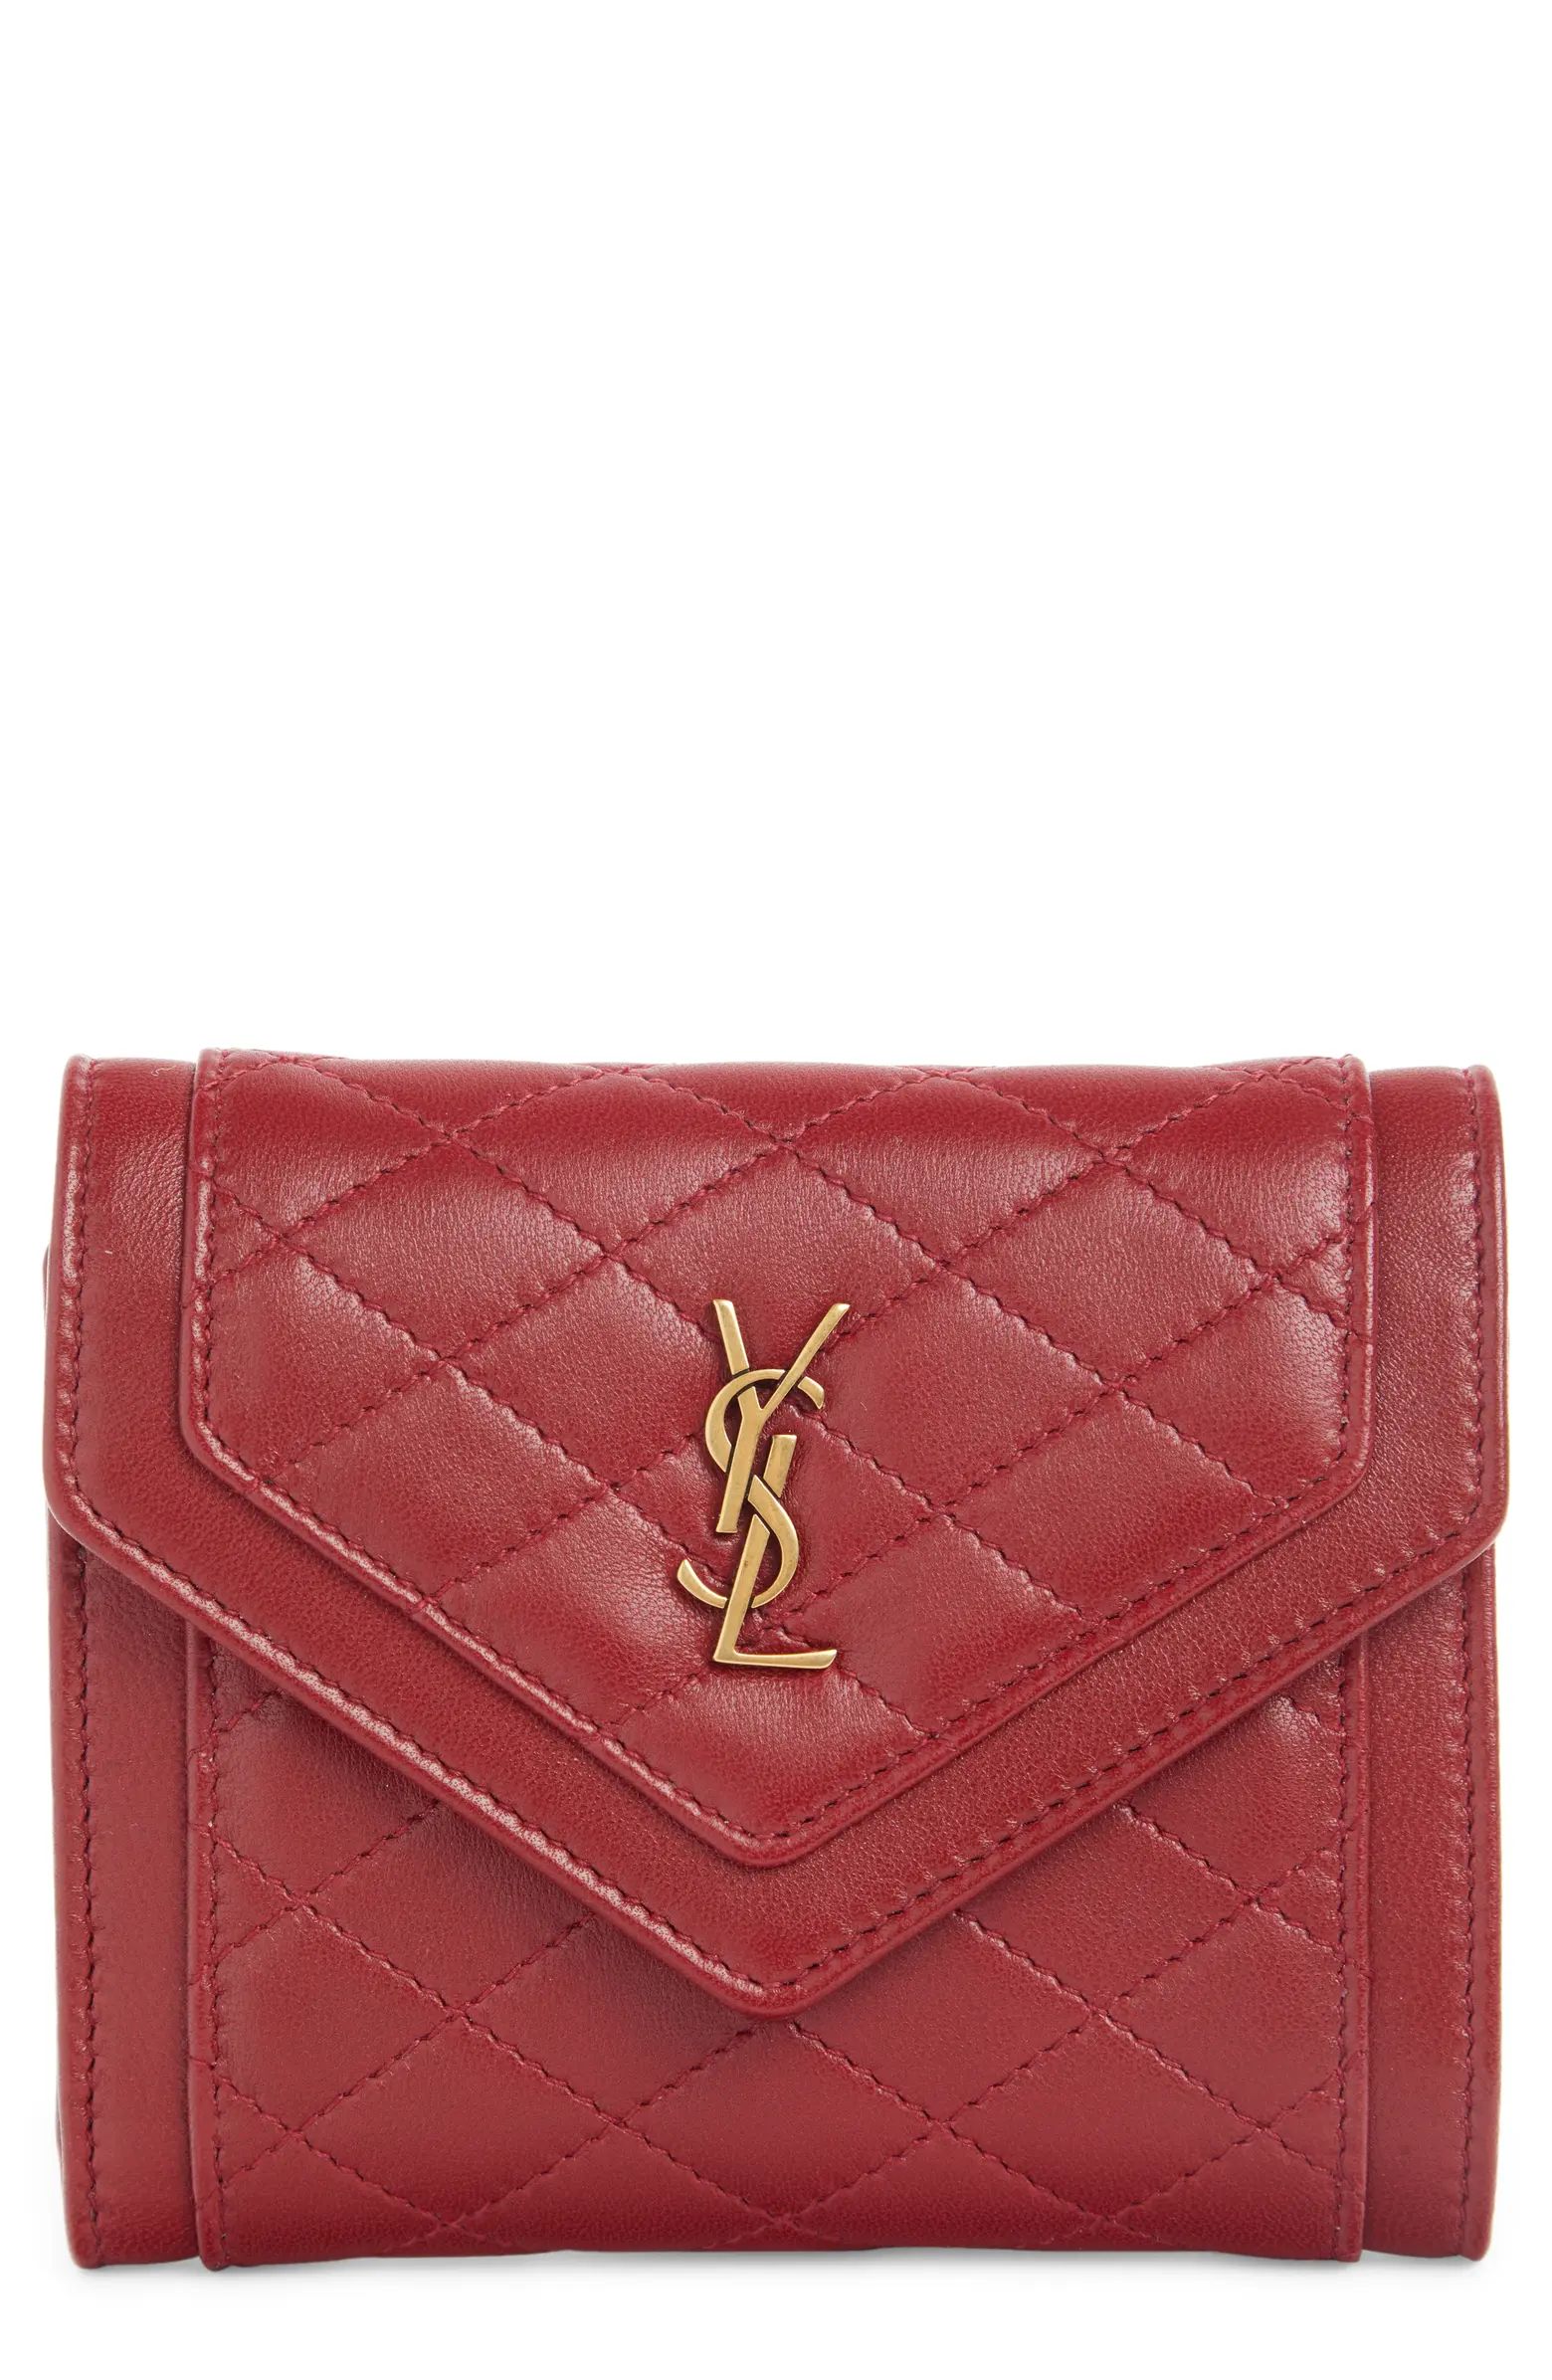 Saint Laurent Small Gaby Quilted Leather Envelope Wallet | Nordstrom | Nordstrom